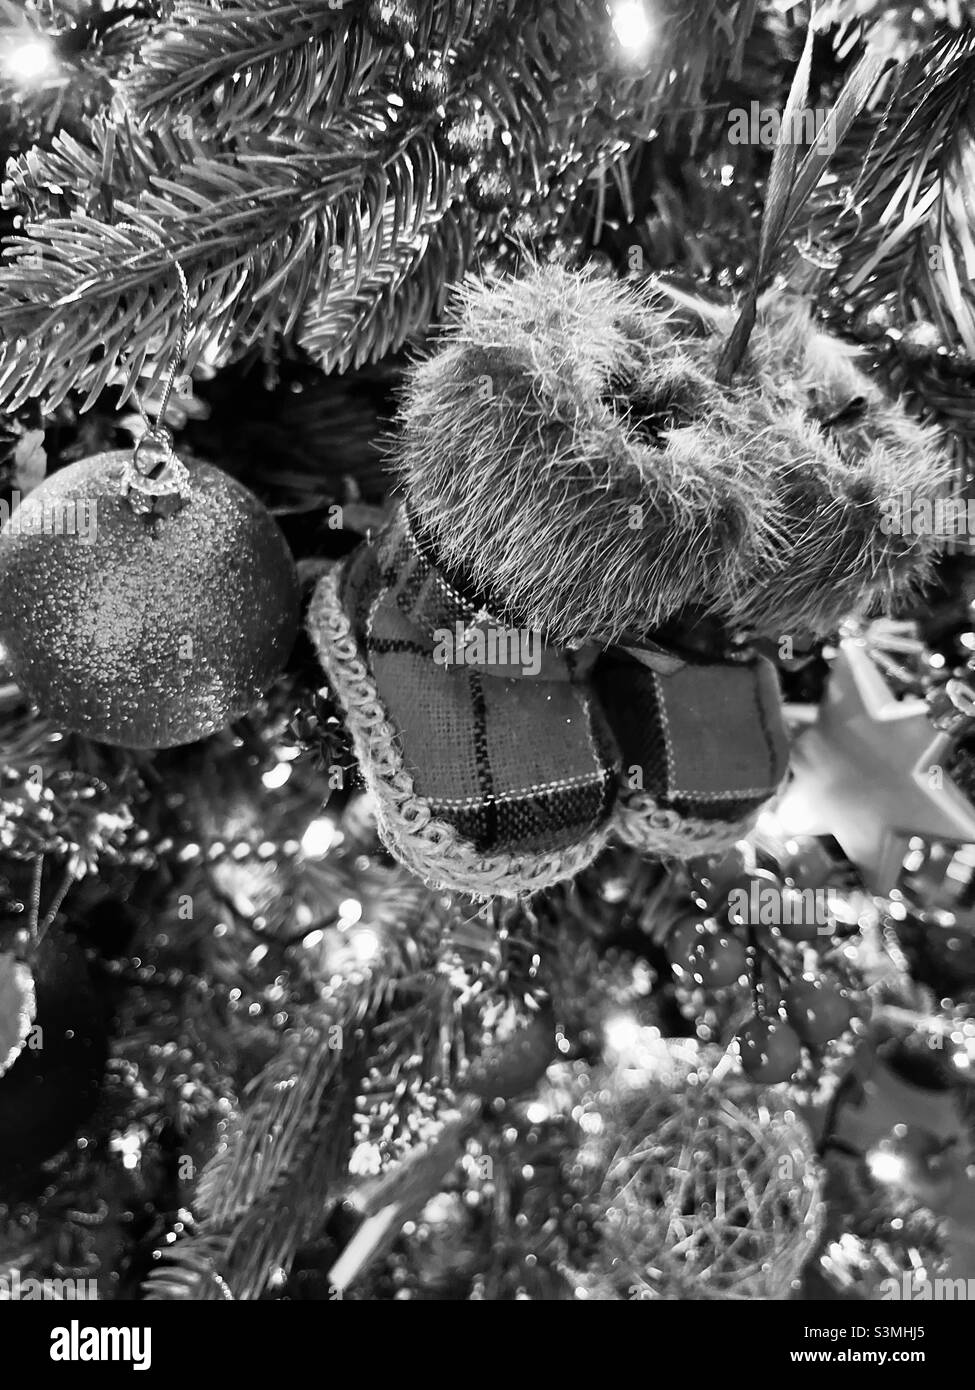 Black and white image of cute boots on a decorated Christmas tree Stock Photo